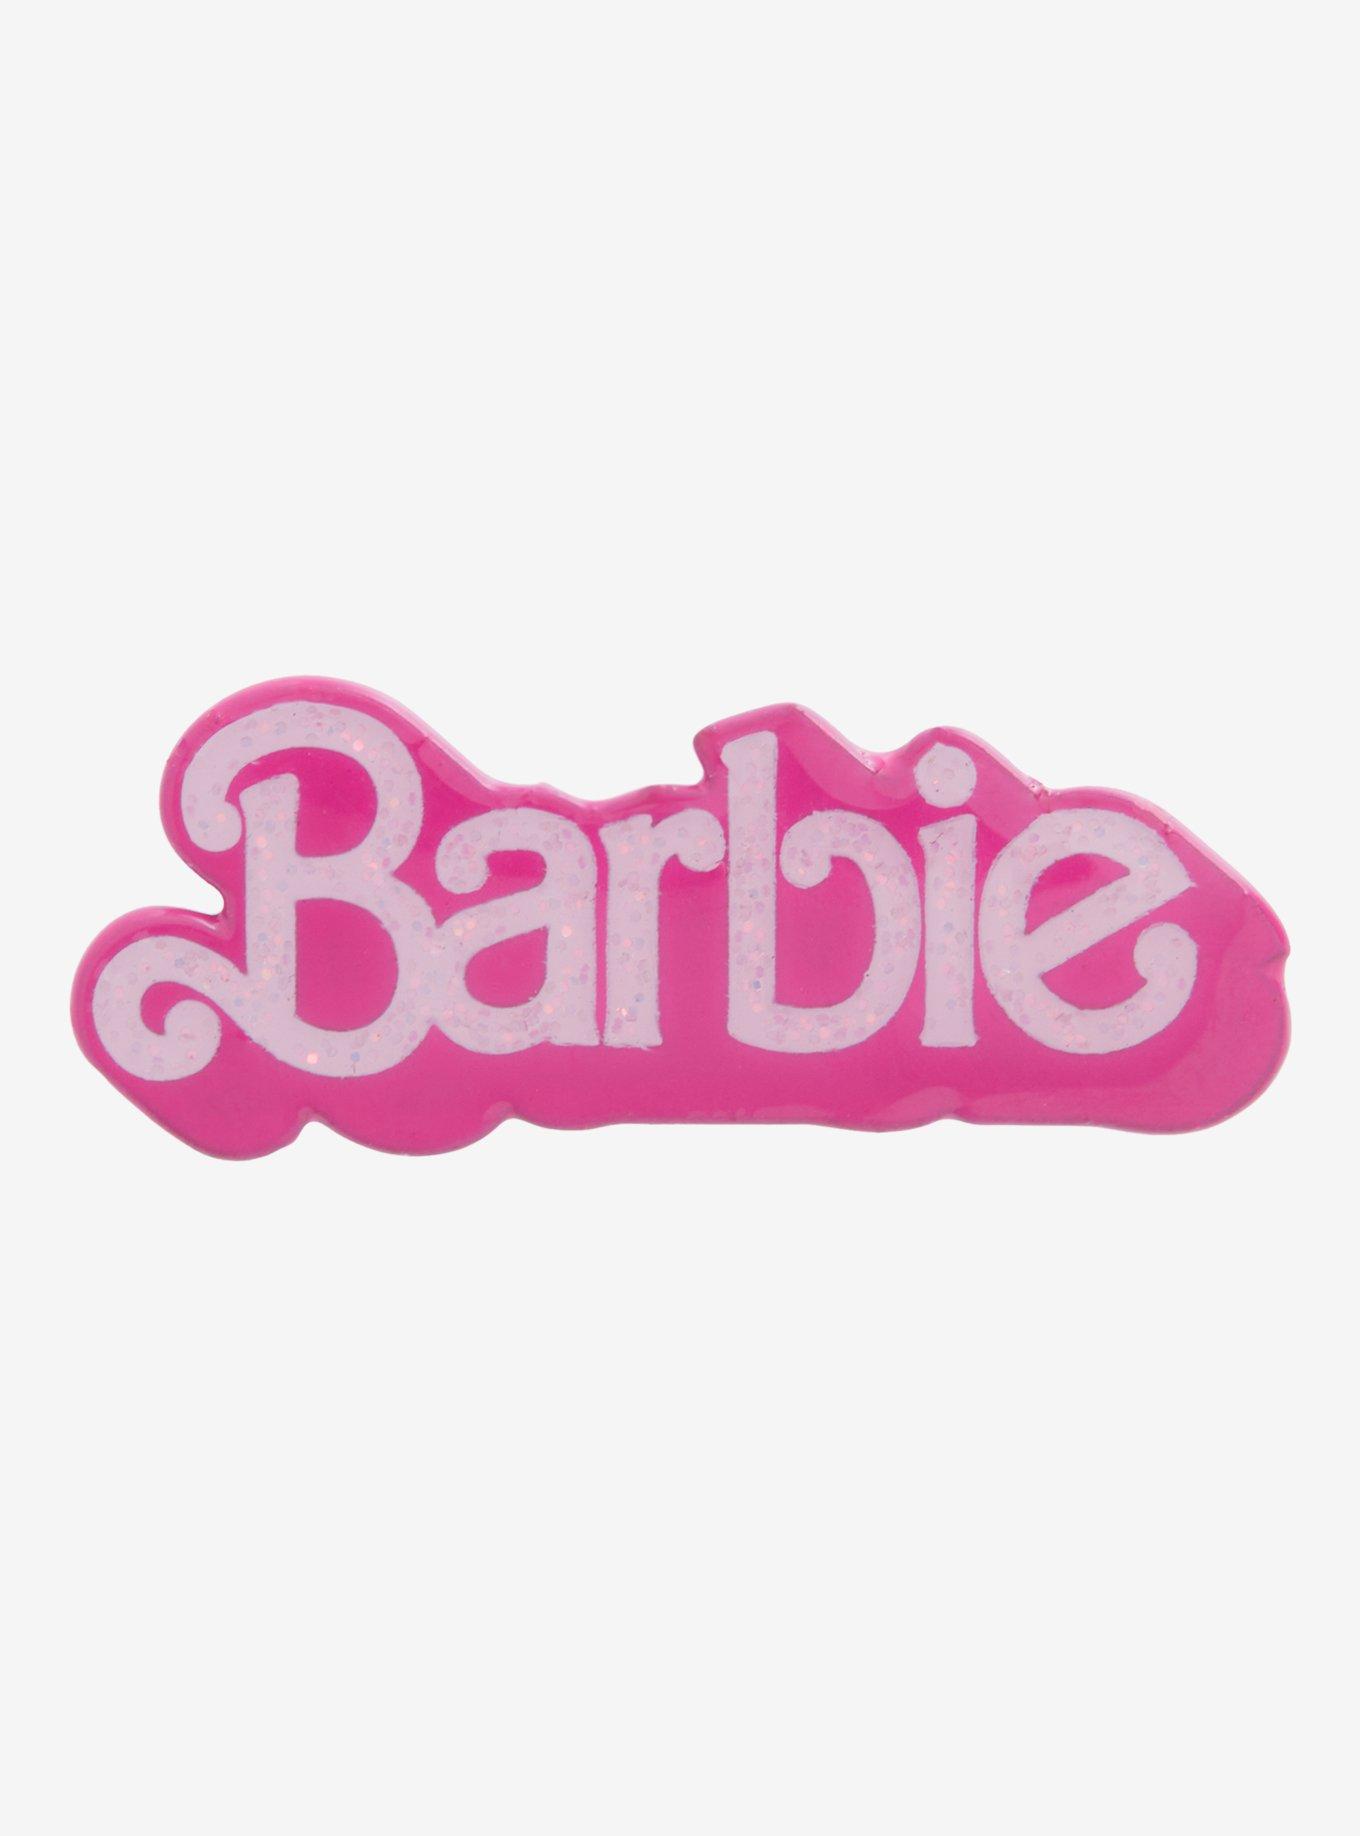 Barbie Always Show your Sparkle-Lunch Box